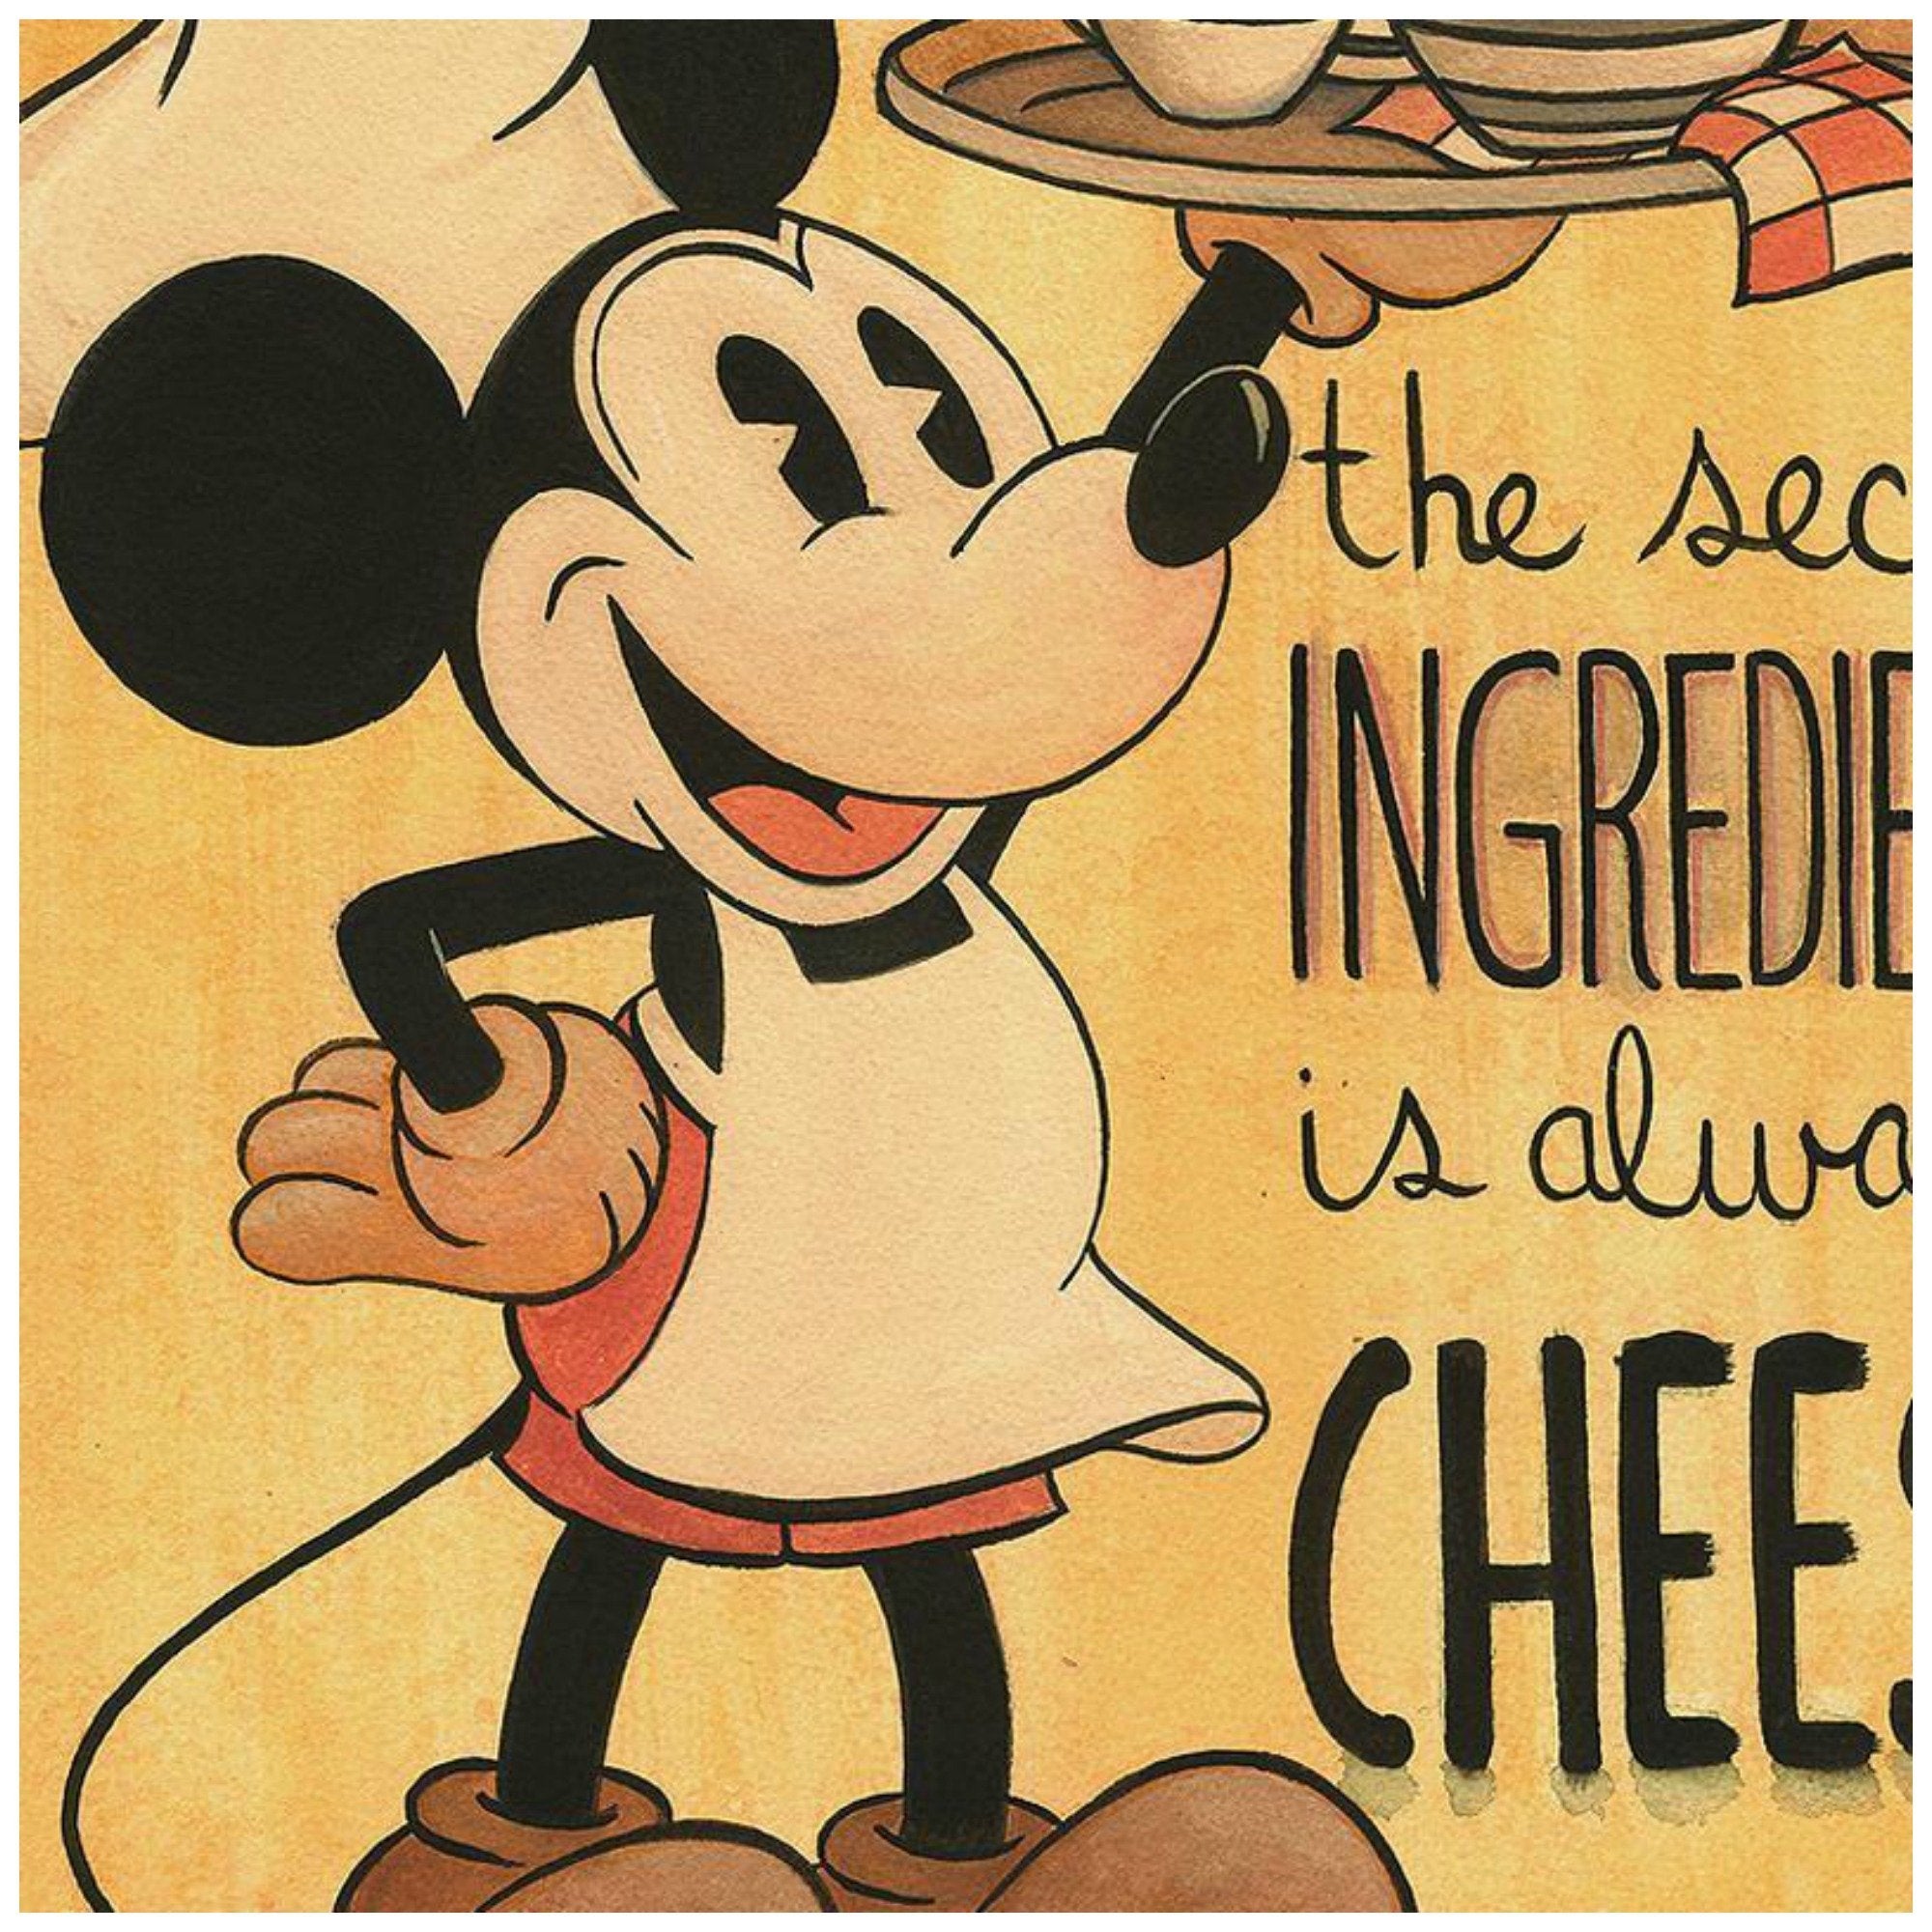 The Secret Ingredien tby Michelle St. Laurent.  Mickey the chef carrys the serving tray with the secret meal, in this vintage style sepia tone colors print - closeup.